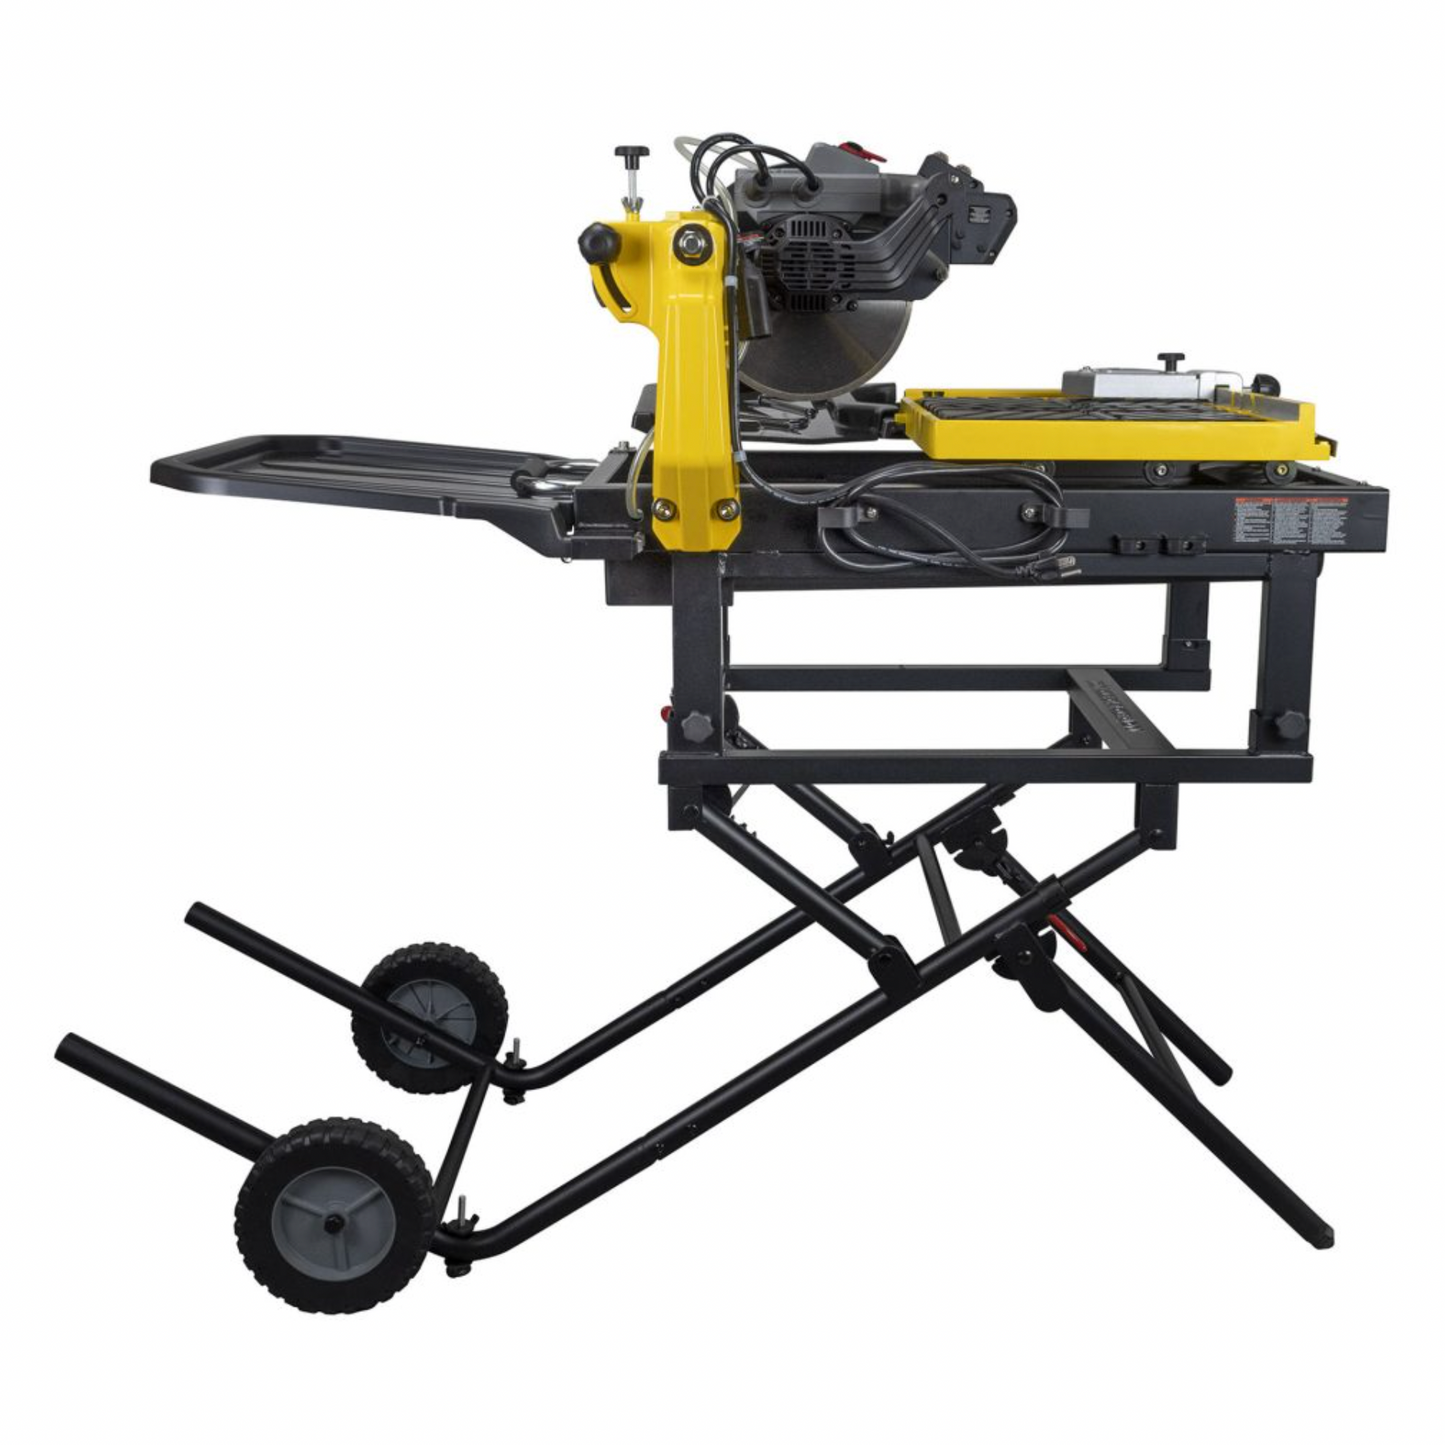 10" 900XT Pro Wet Tile Saw - High-Performance Cutting Tool for Professional Results